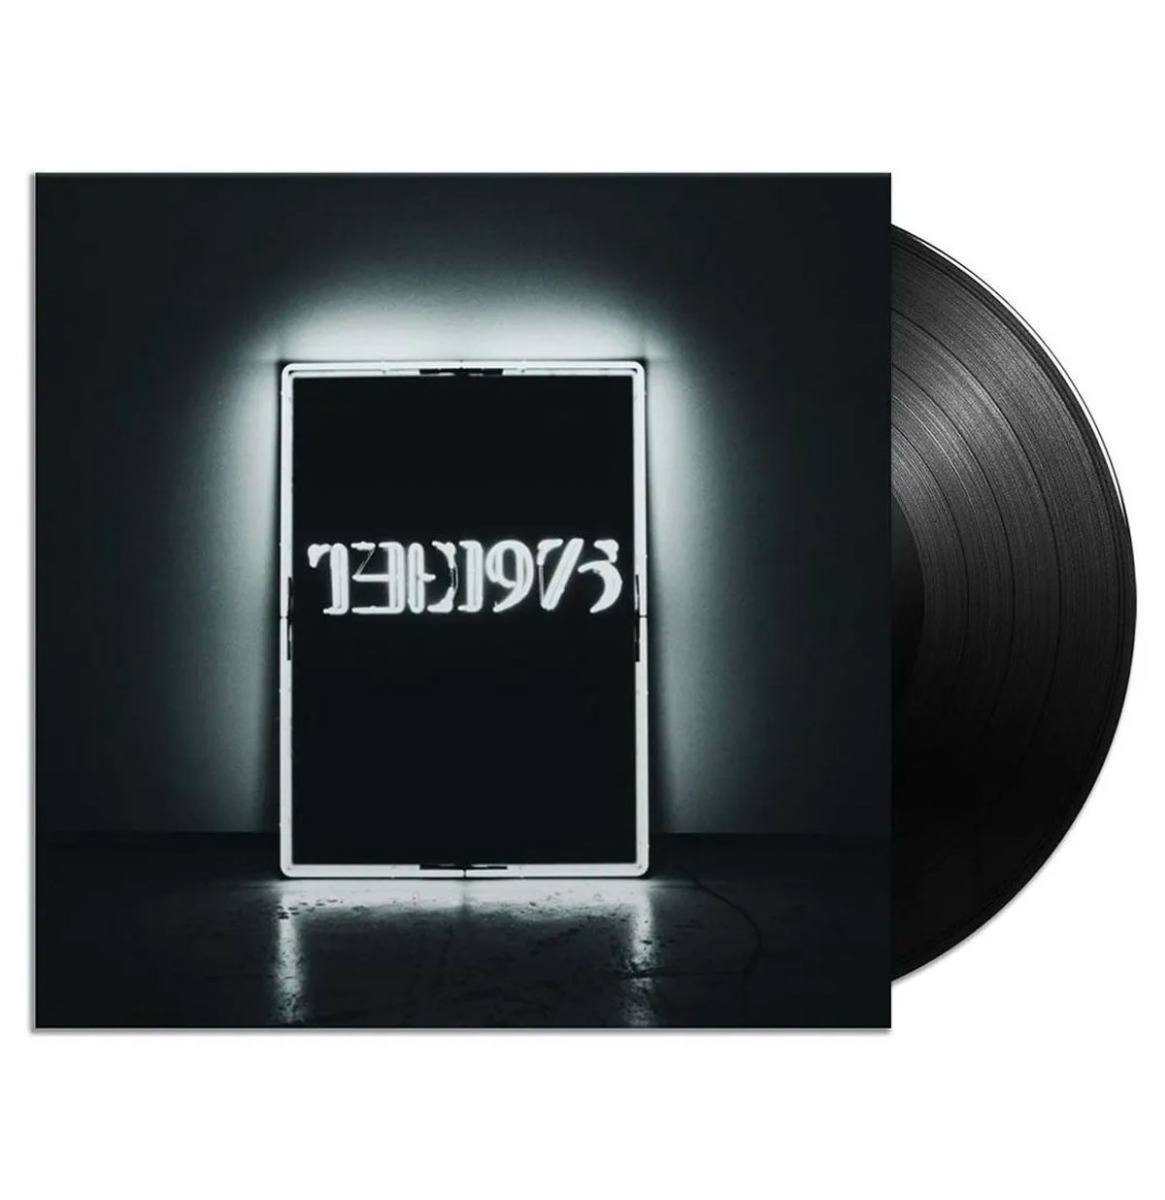 The 1975 - The 1975 Deluxe 2LP